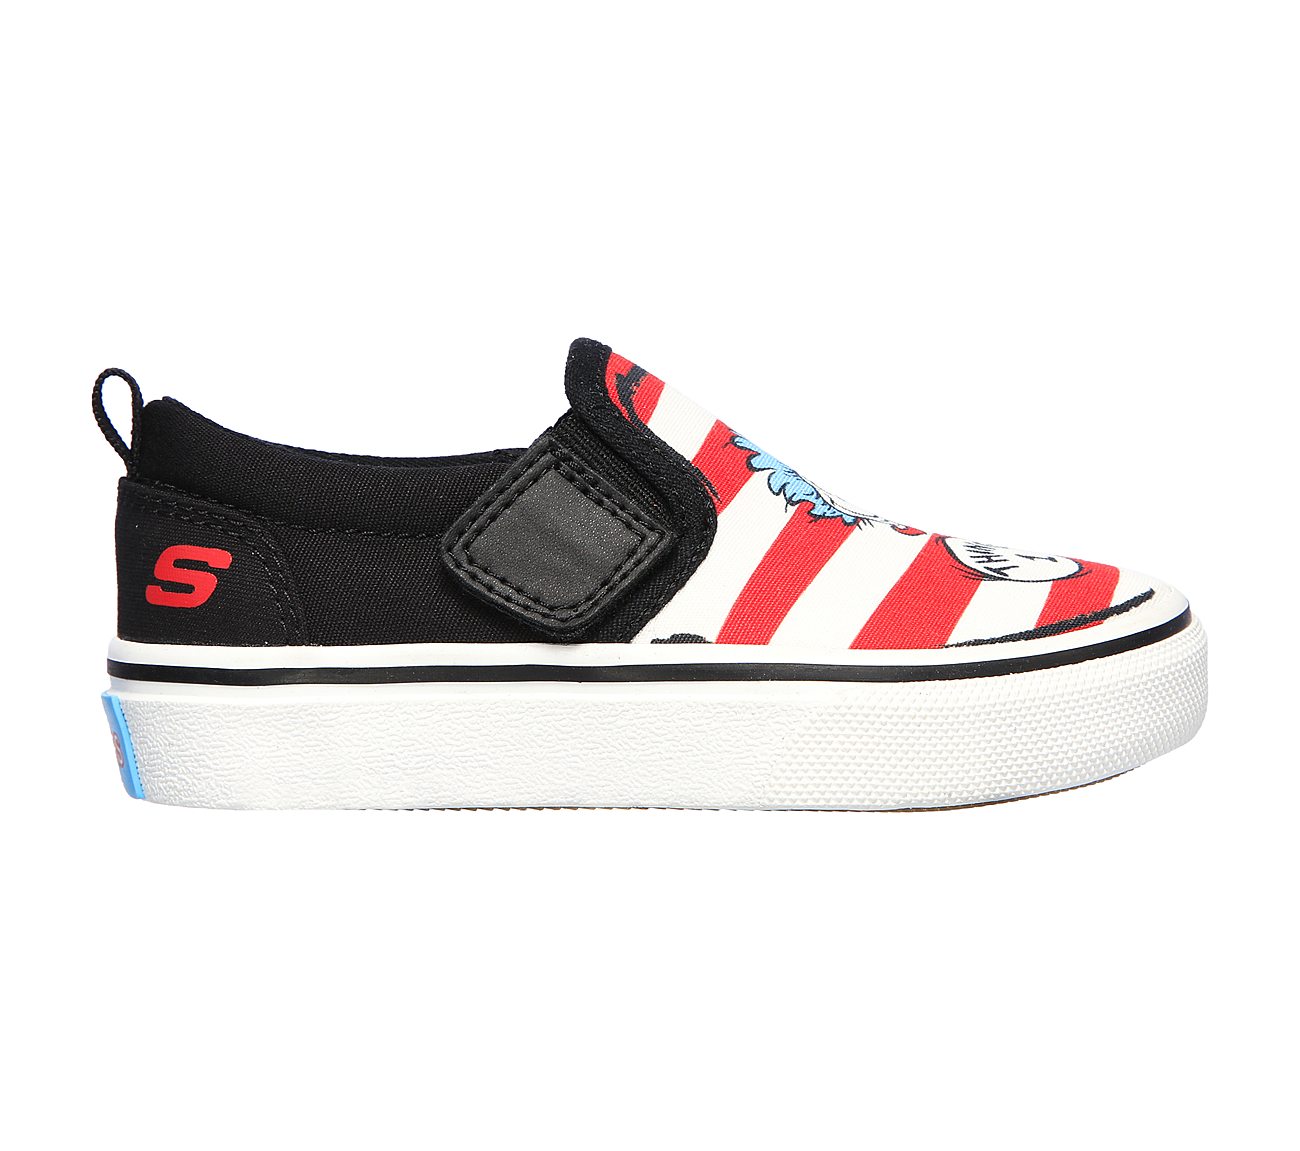 Buy SKECHERS Dr. Seuss: Street Fame - Things At Play Dr. Seuss Shoes